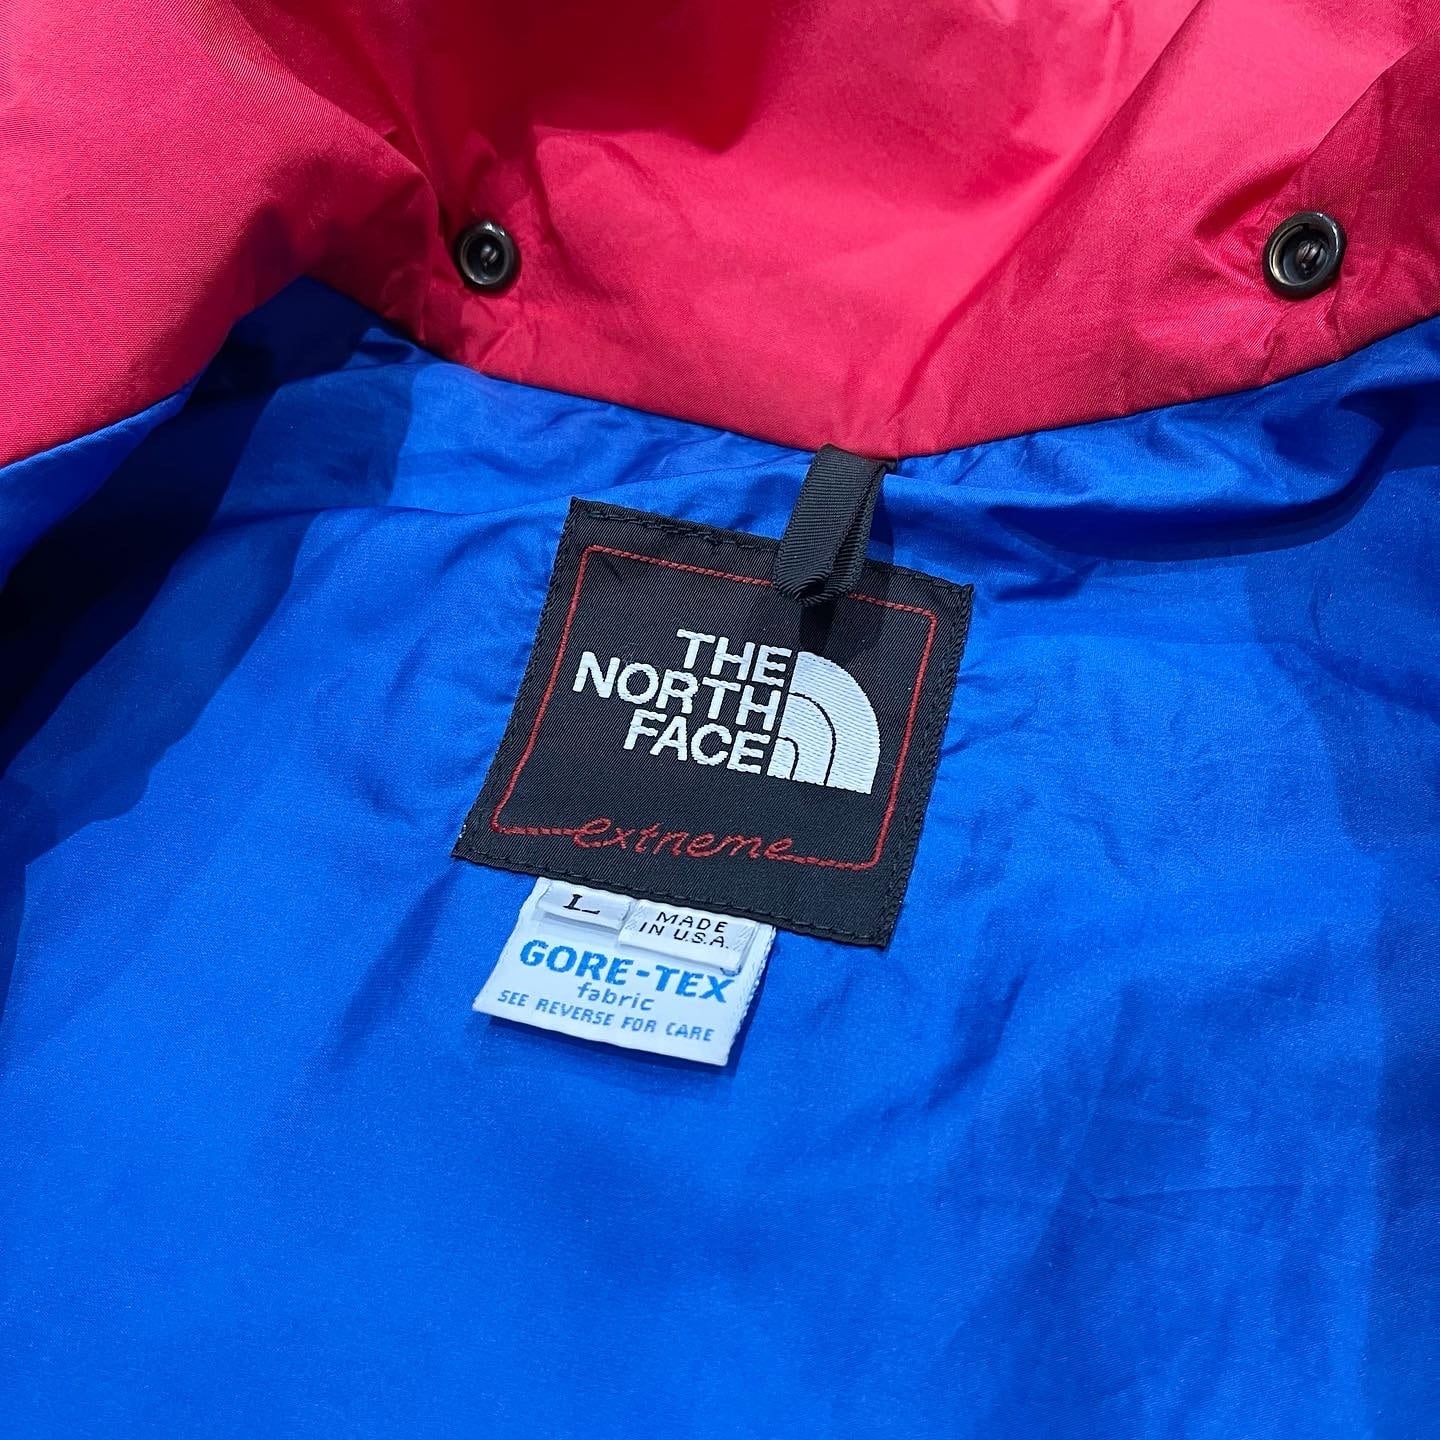 THE NORTH FACE/ ザ ノース フェイス 80s-90s extreme-z GORE-TEX JKT MADE IN U.S.A.